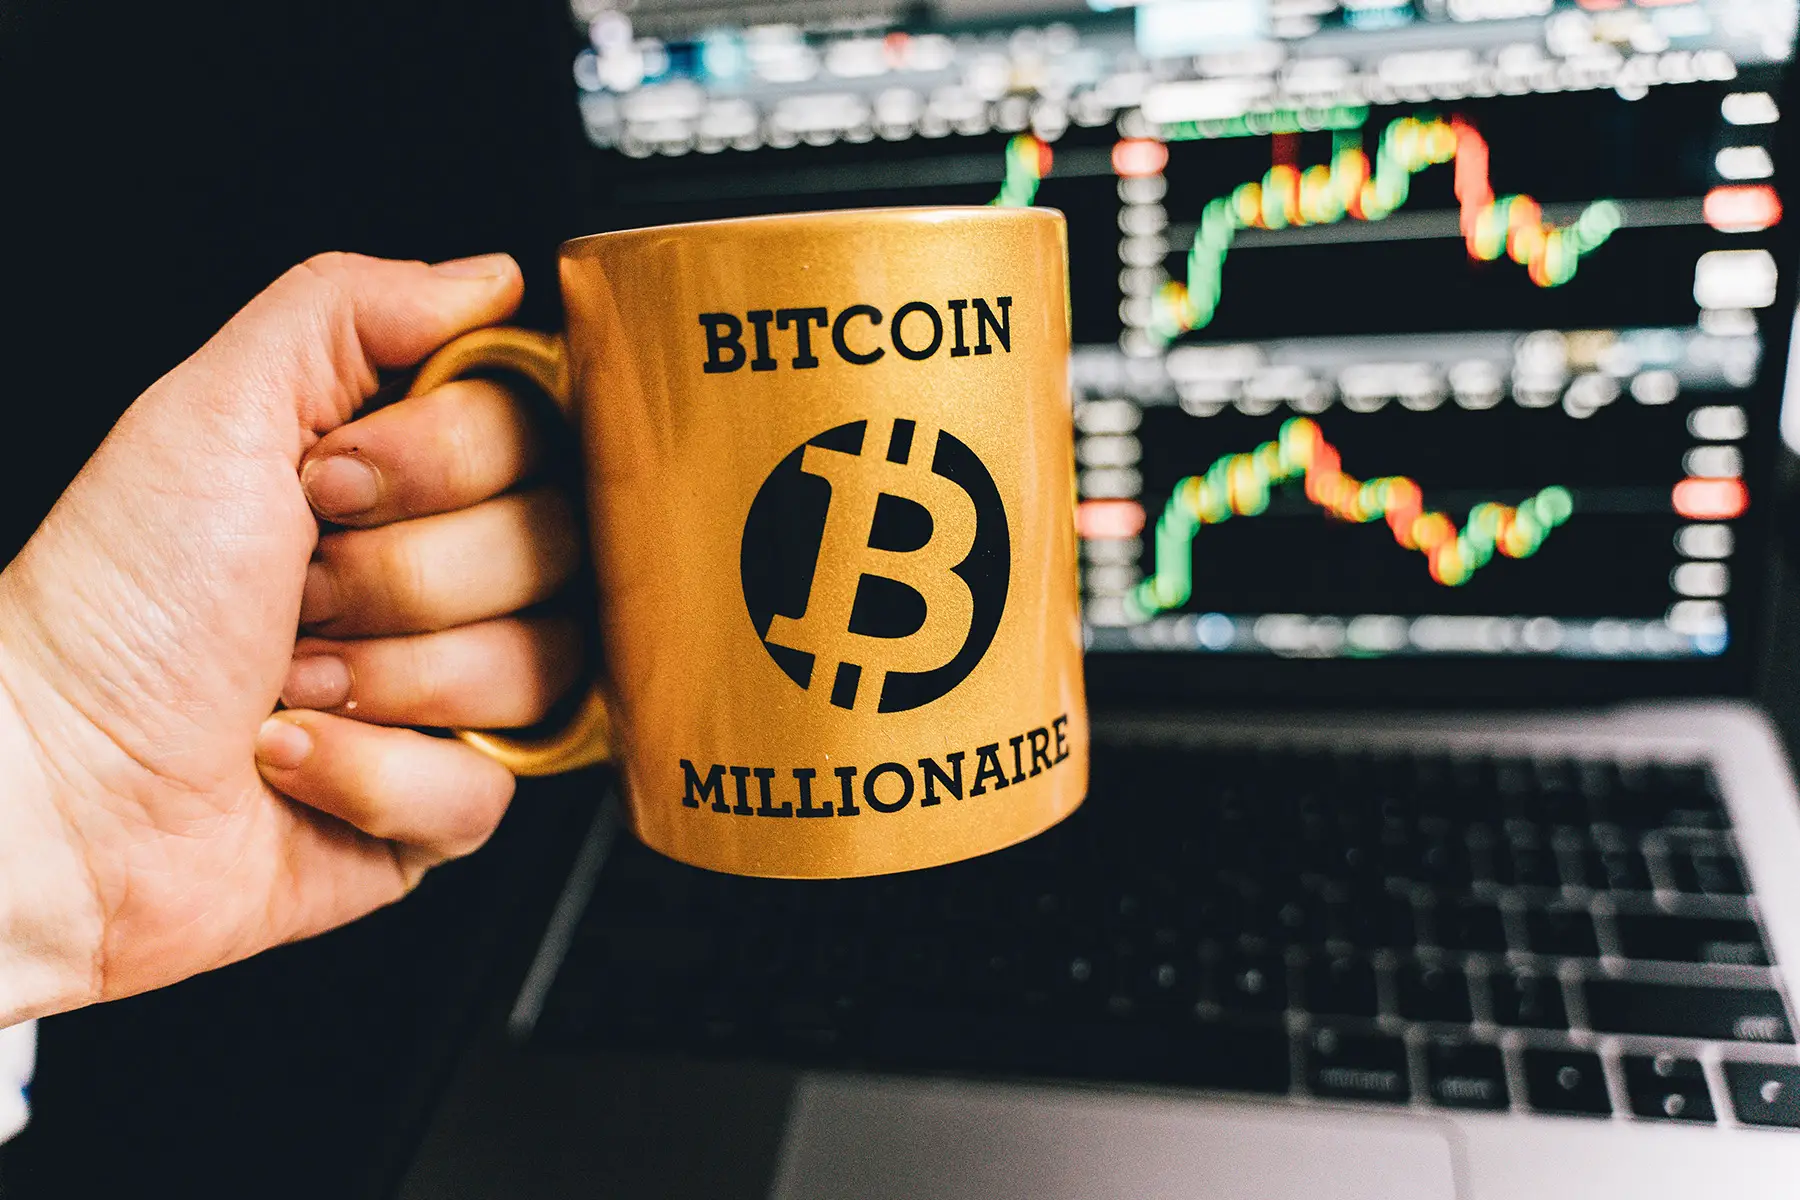 Golden Bitcoin millionaire mug in front of a laptop showing online crypto portfolio